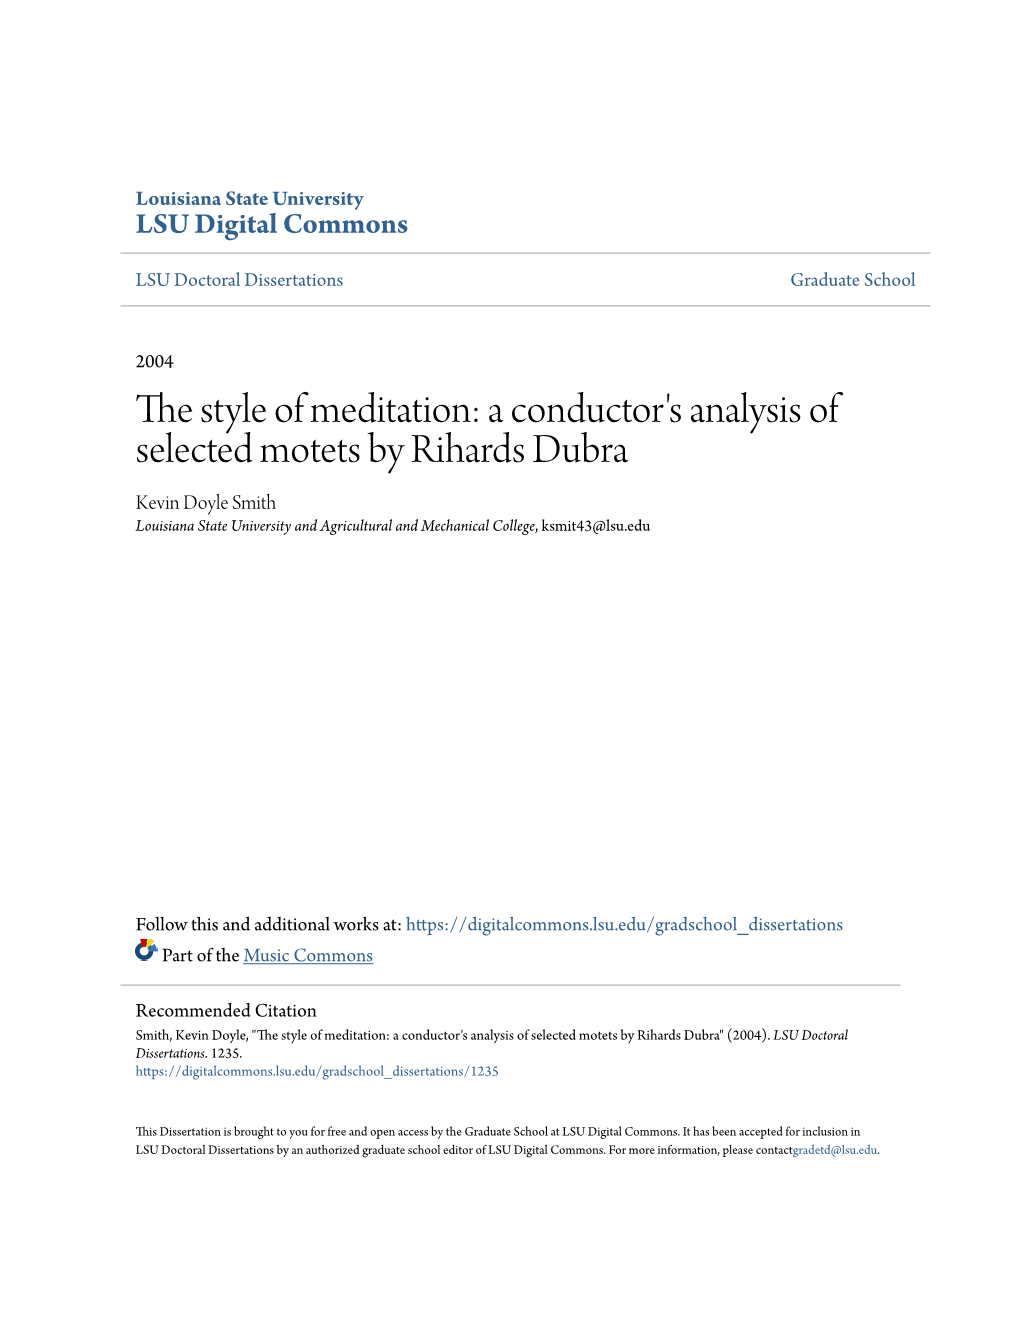 A Conductor's Analysis of Selected Motets by Rihards Dubra Kevin Doyle Smith Louisiana State University and Agricultural and Mechanical College, Ksmit43@Lsu.Edu